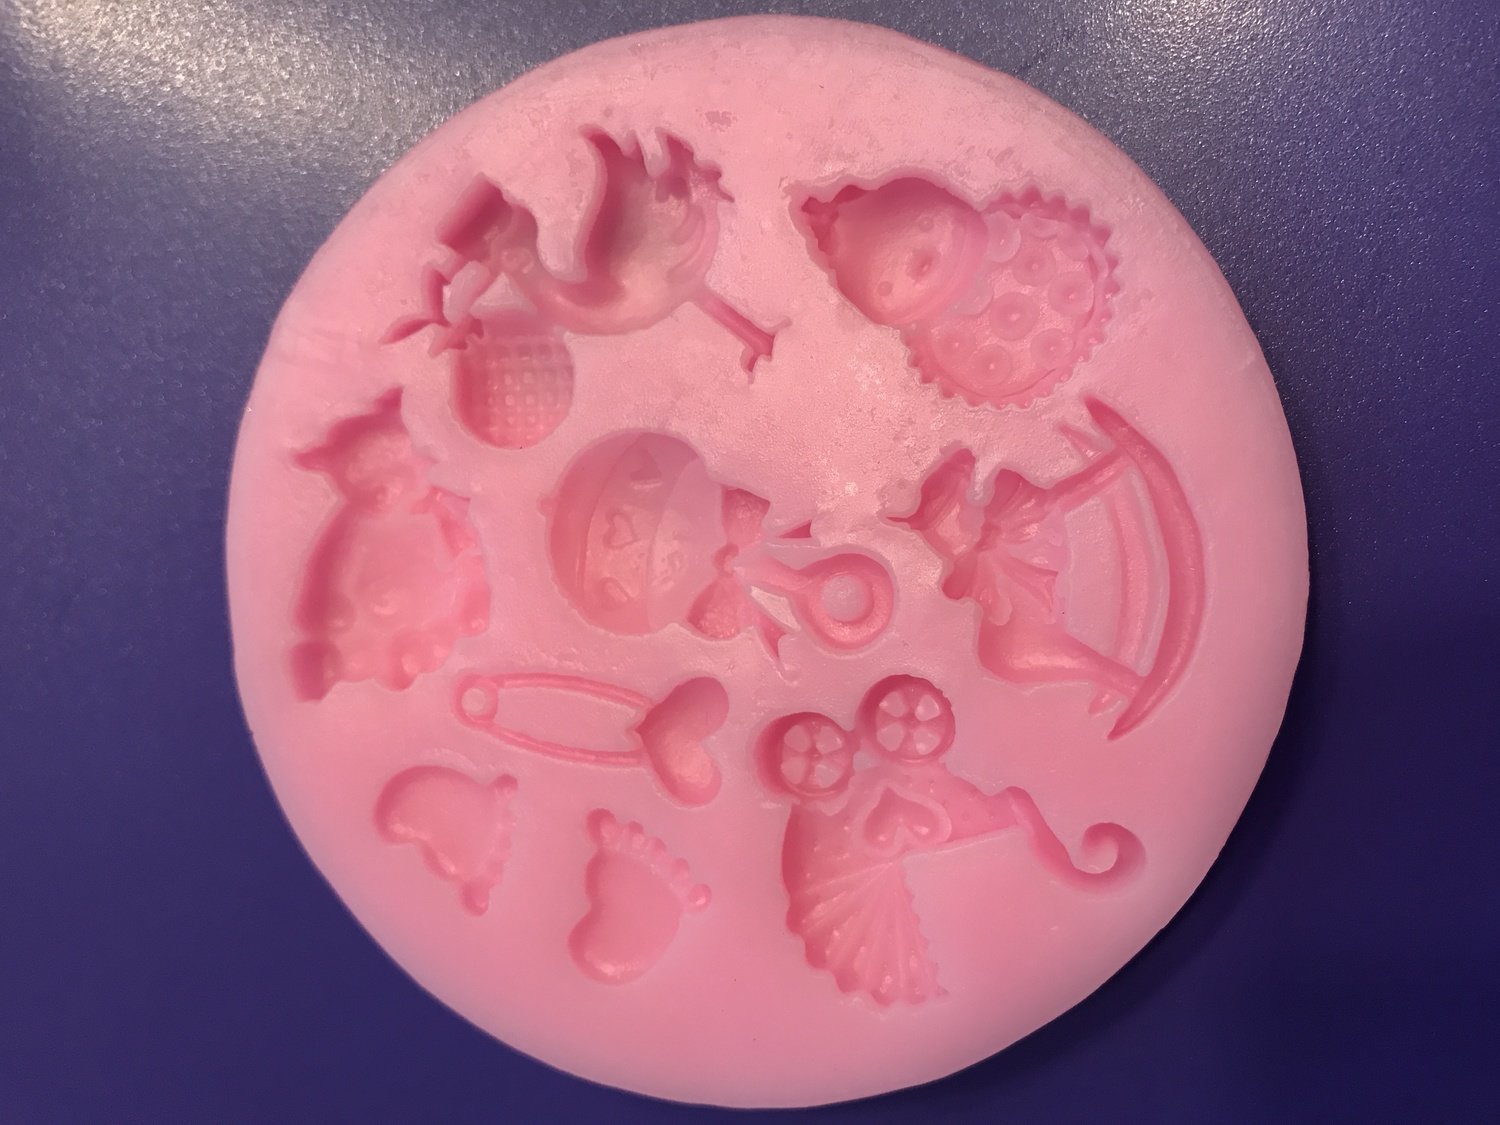 Baby Silicone Mold